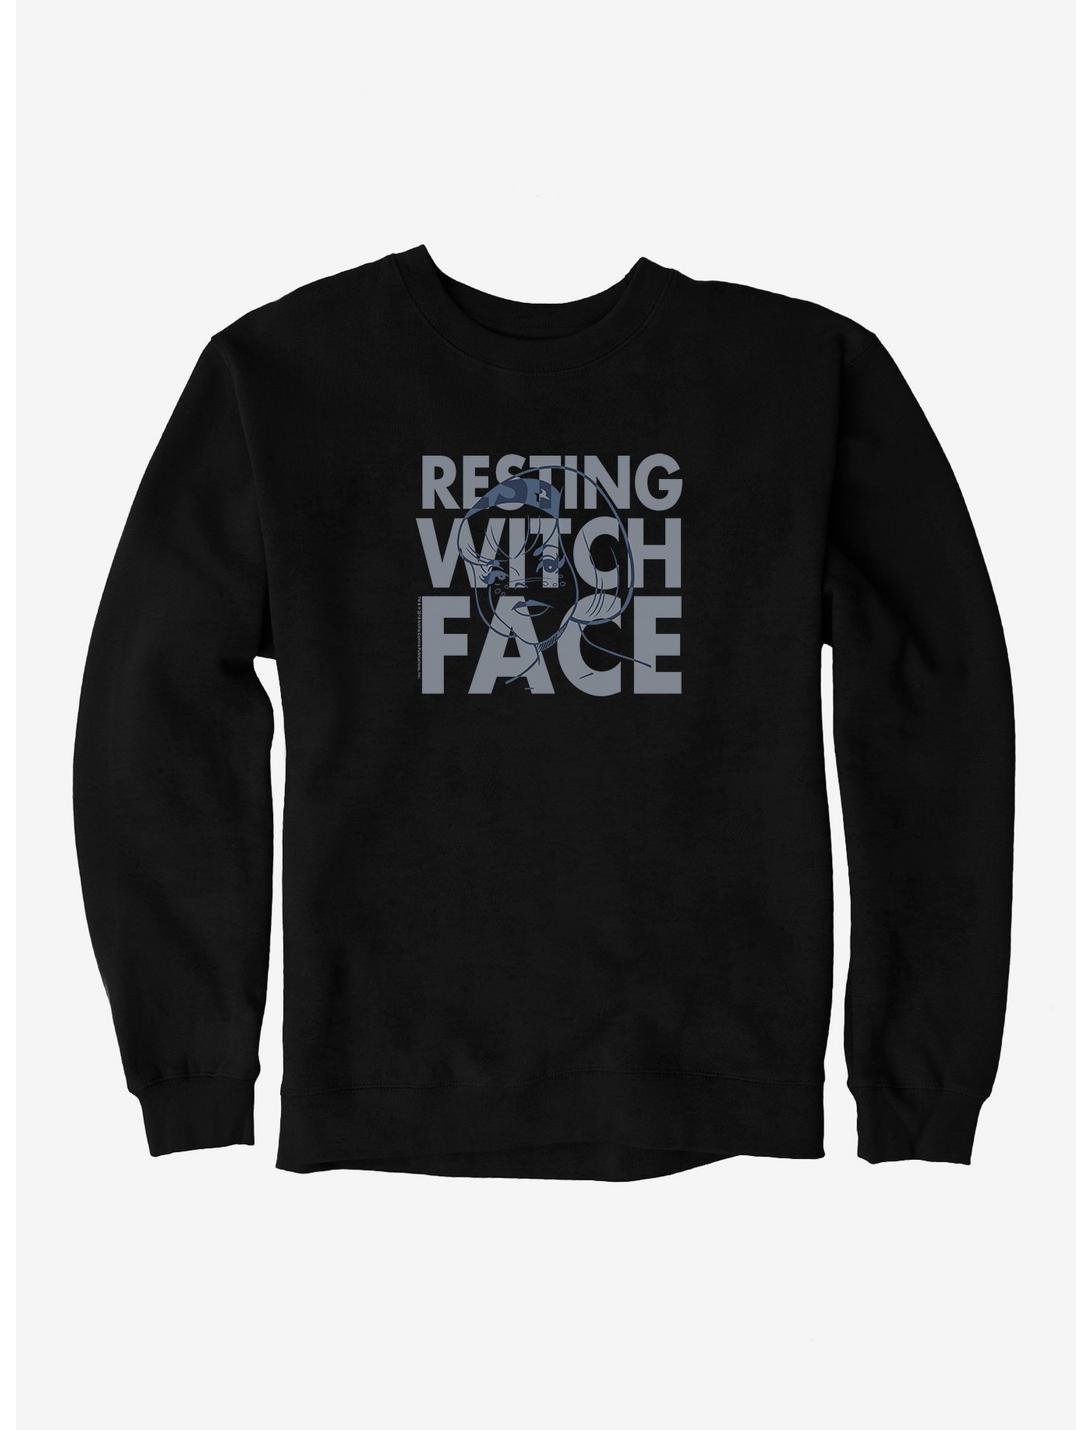 Archie Comics Chilling Adventures of Sabrina Resting Witch Face Sweatshirt, , hi-res